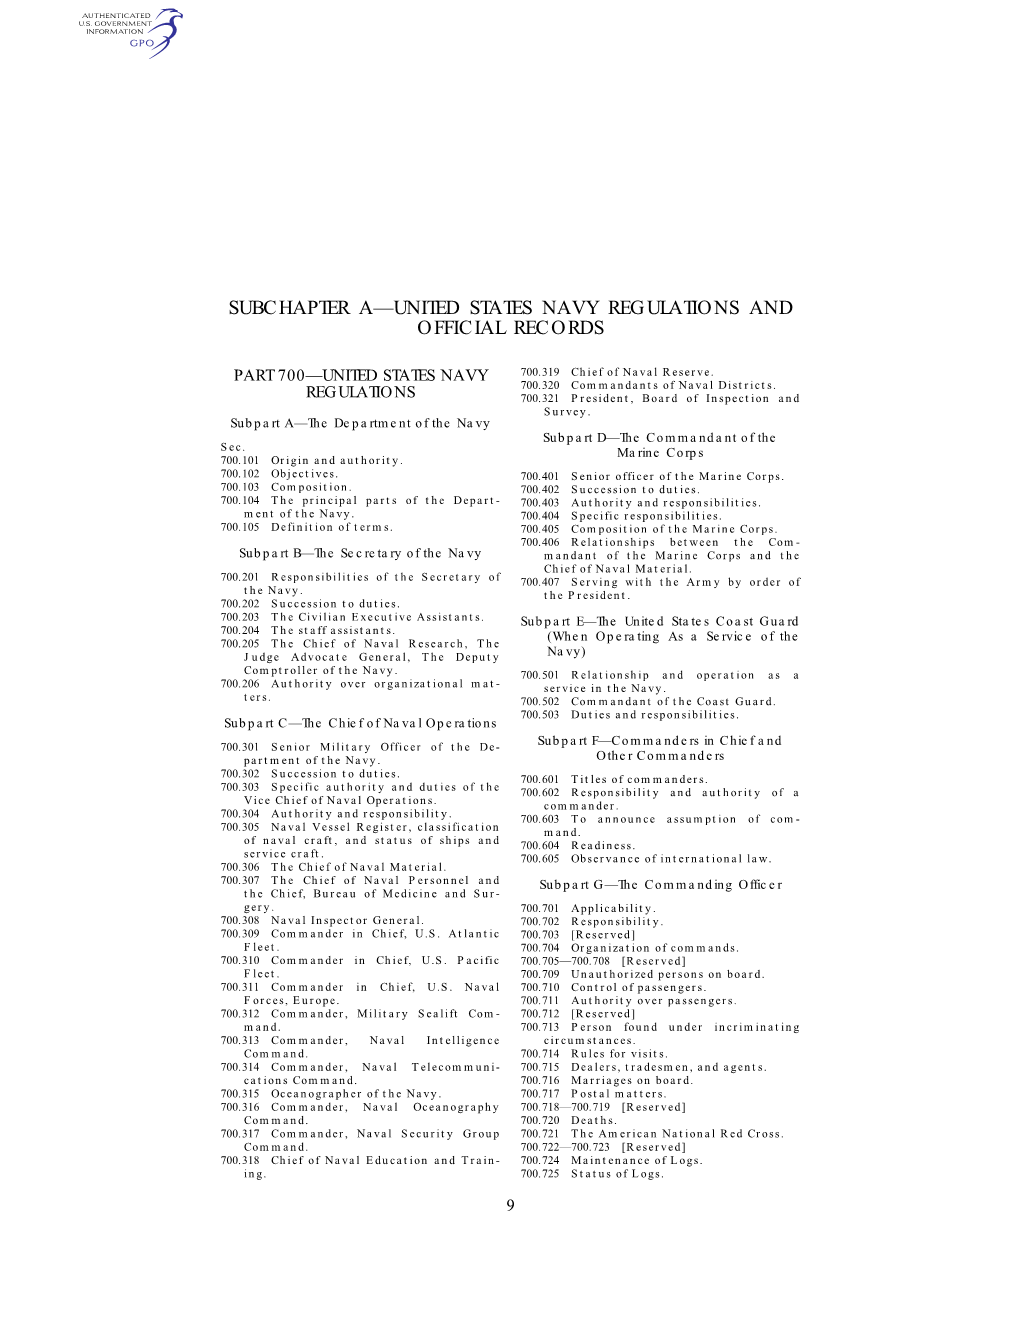 Subchapter A—United States Navy Regulations and Official Records